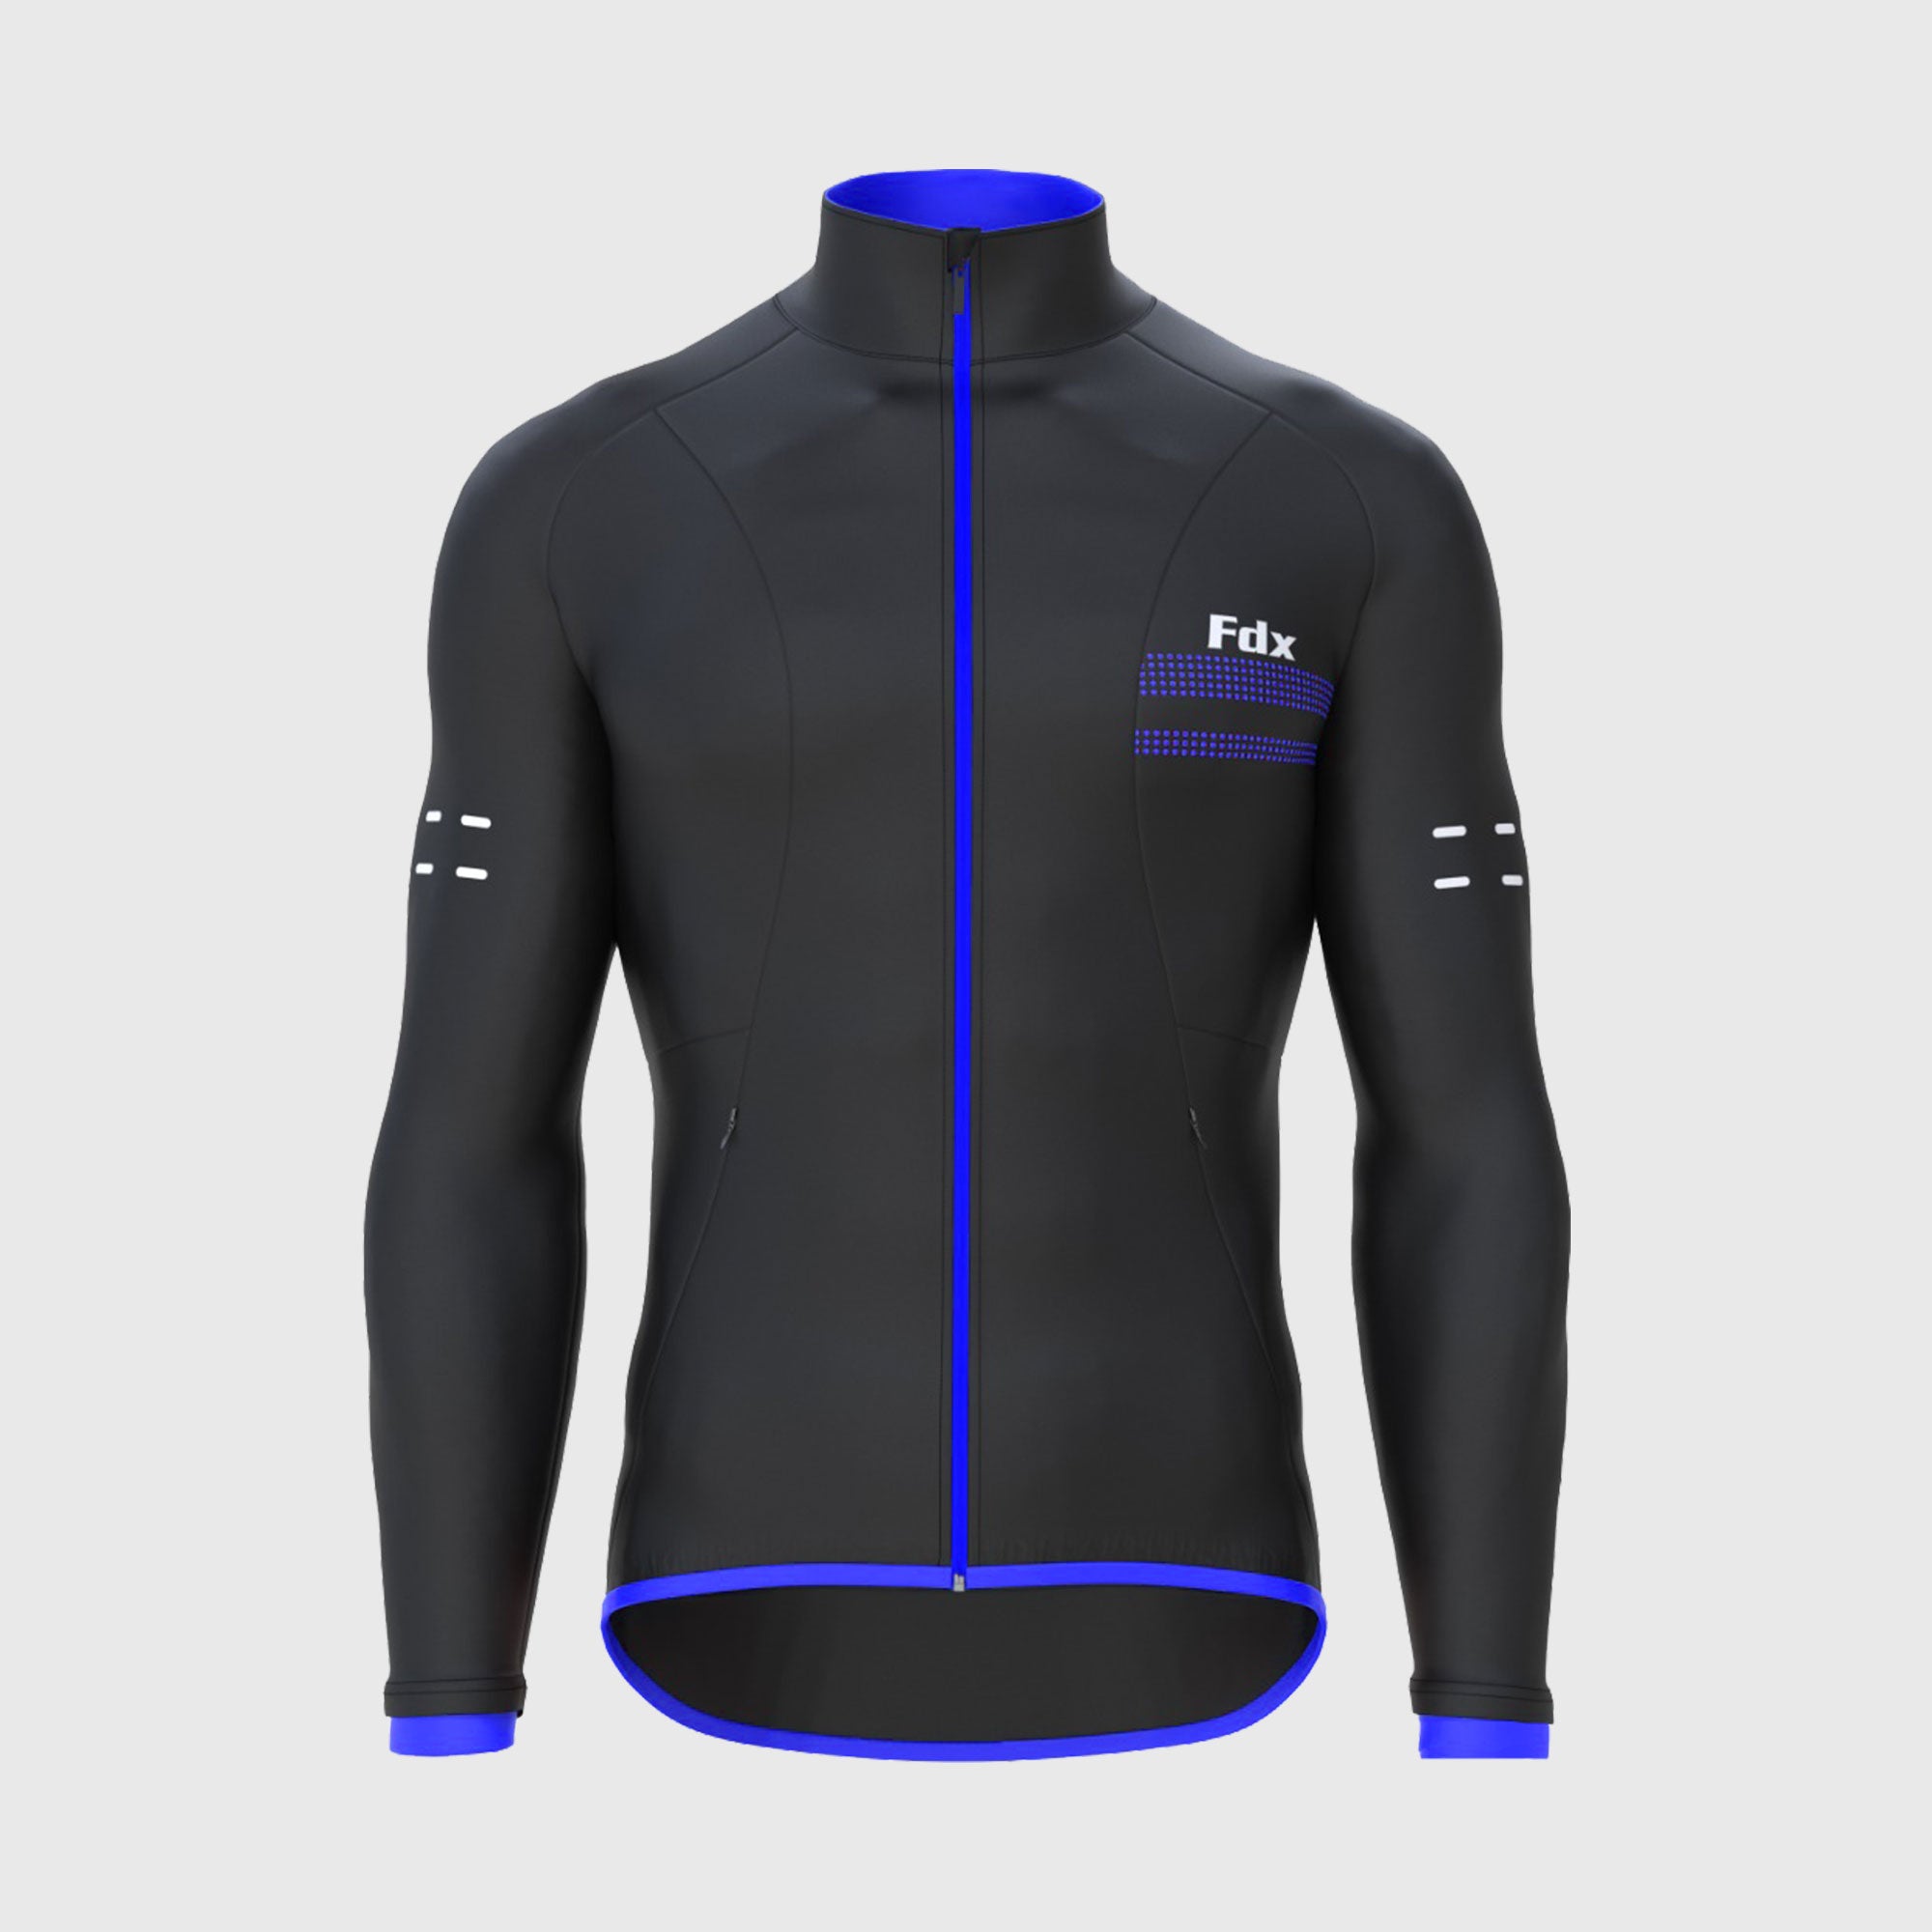 Fdx Mens Black & Blue Cycling Jacket for Winter Thermal Casual Softshell Clothing Lightweight, Windproof, Waterproof & Pockets - Arch